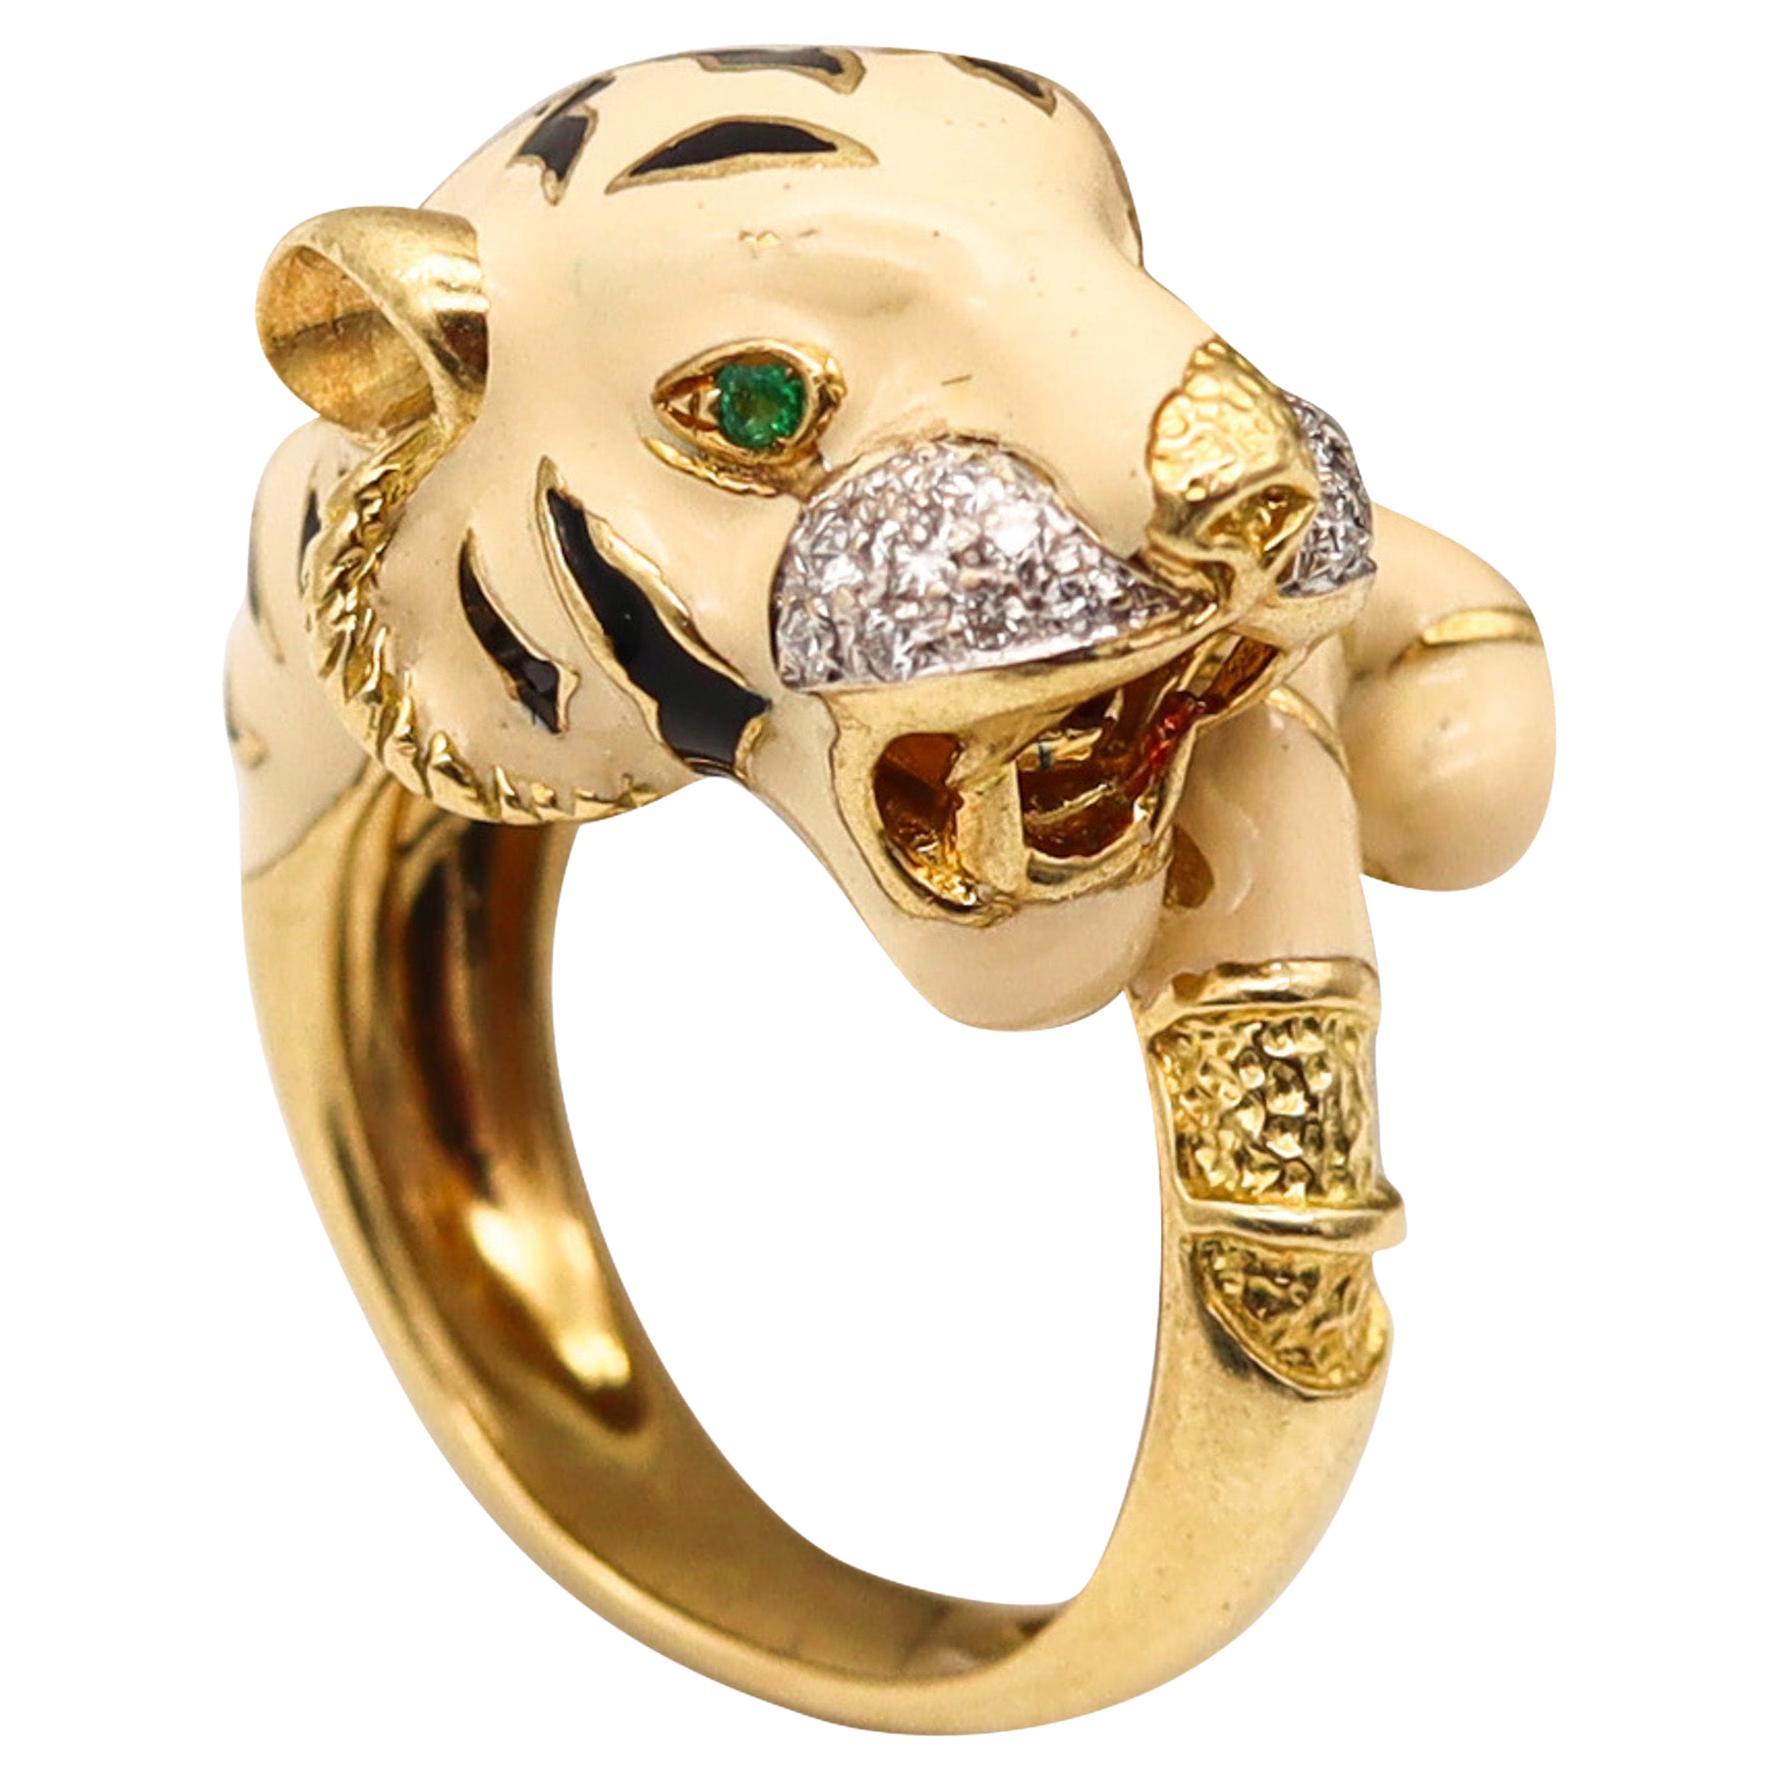 Roberto Legnazzi Enameled Tiger Ring In 18Kt Gold With Diamonds And Emeralds